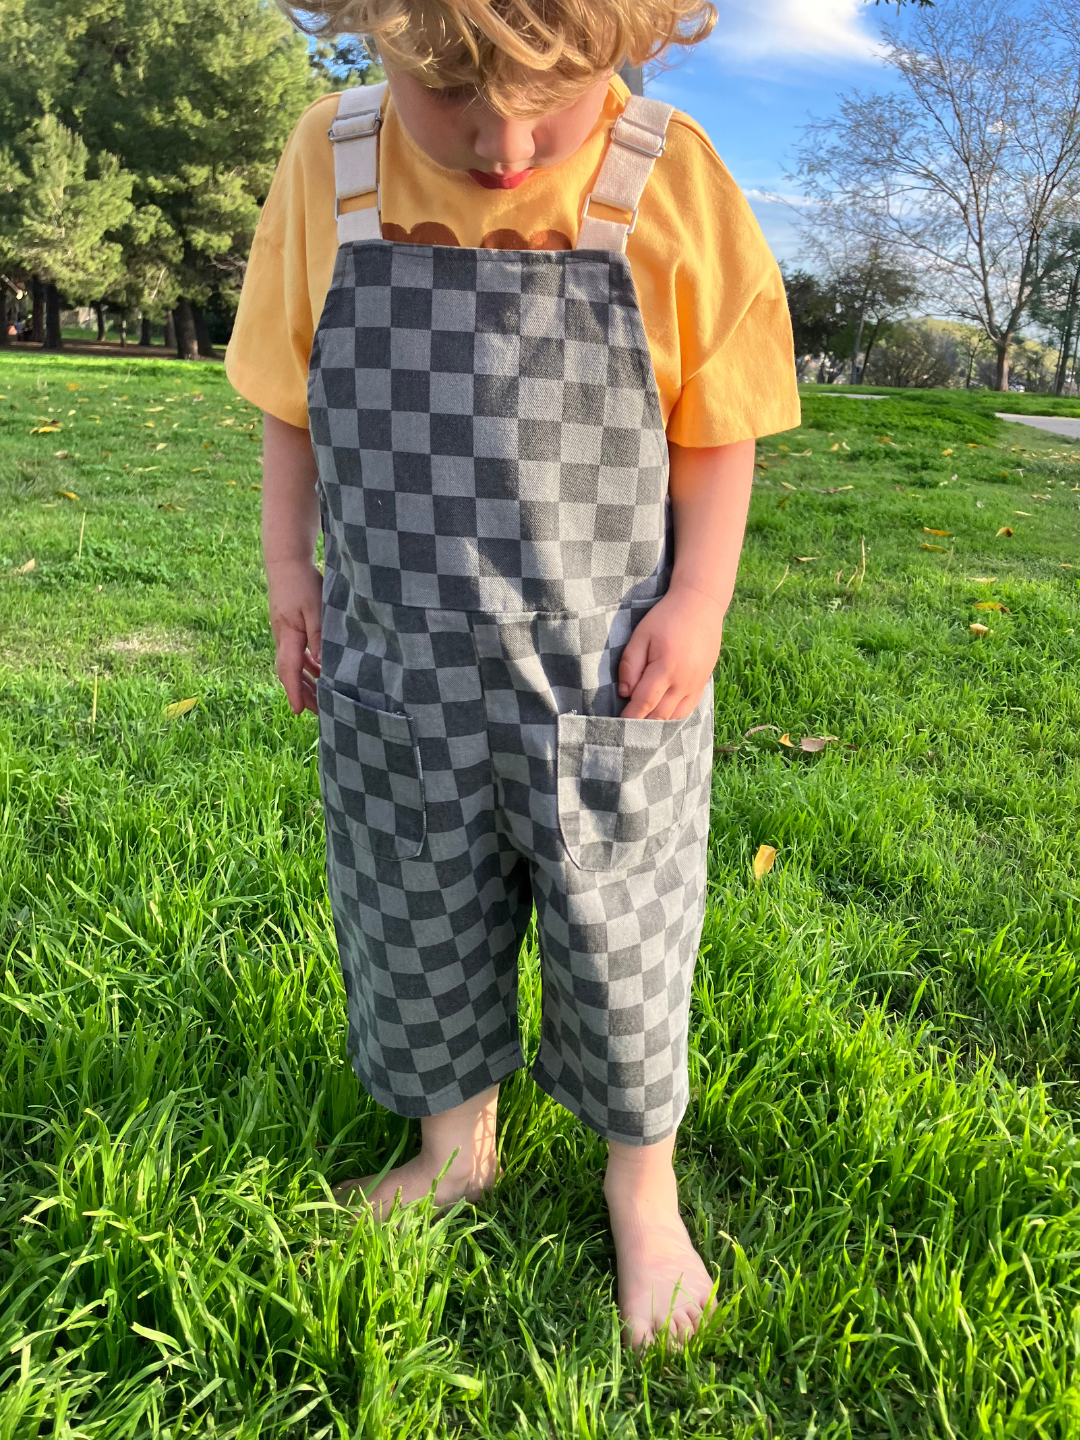 A child is wearing checker overalls in charcoal over a yellow tee